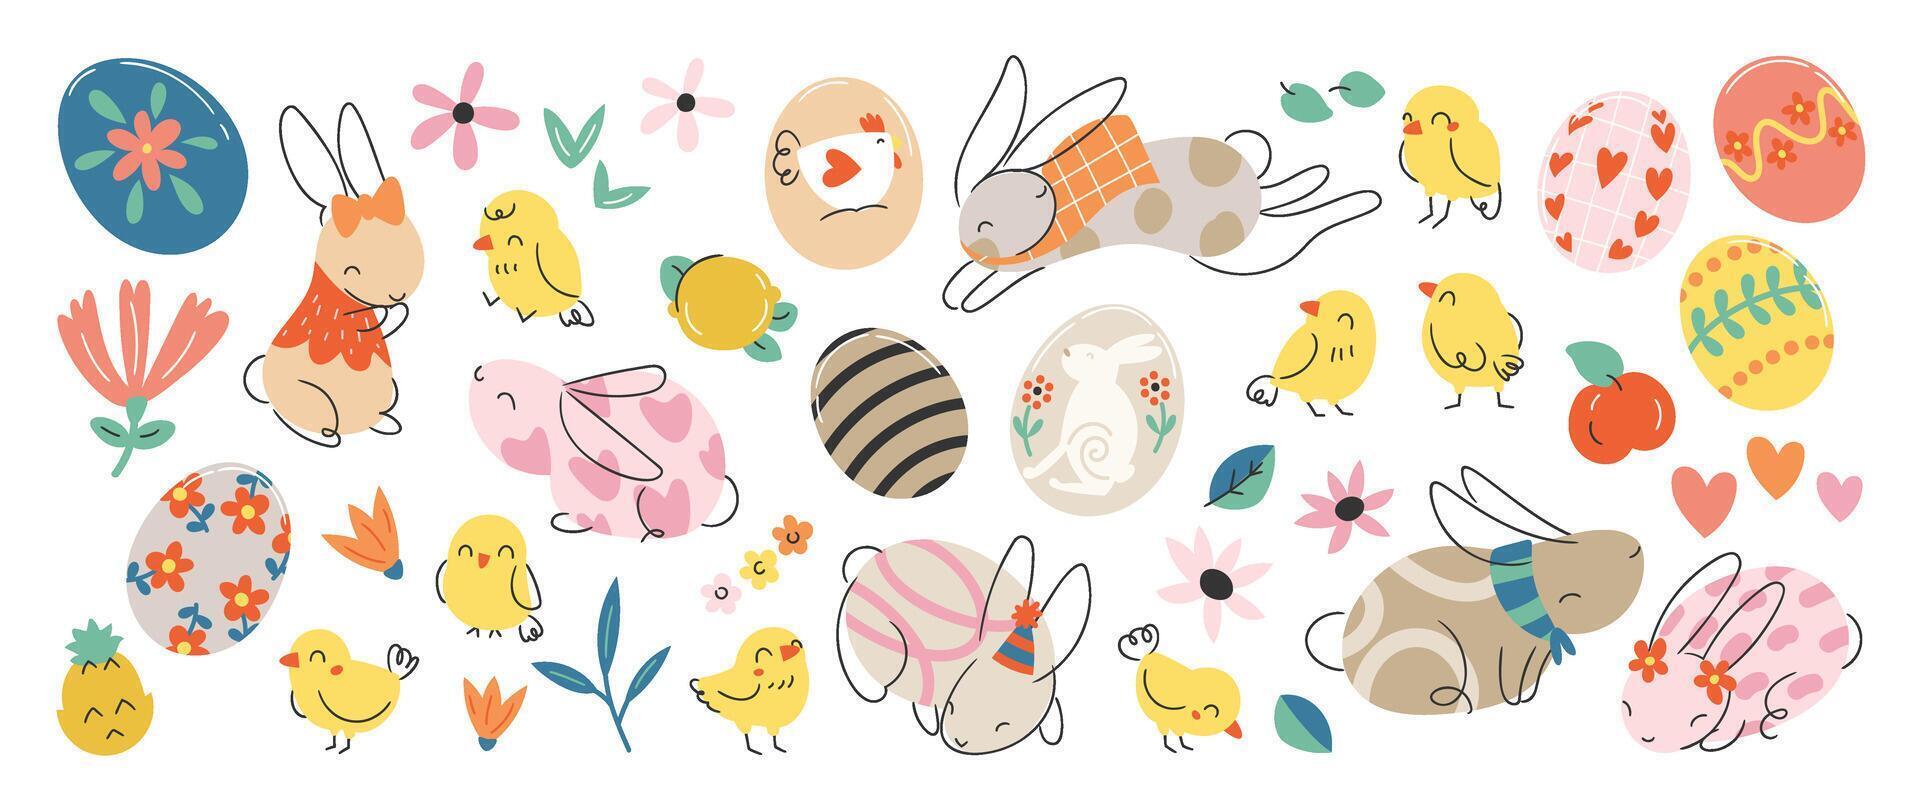 Happy Easter comic element vector set. Cute hand drawn rabbit, chicken, easter egg, spring flowers, pineapple, apple. Collection of doodle animal and adorable design for decorative, card, kids.